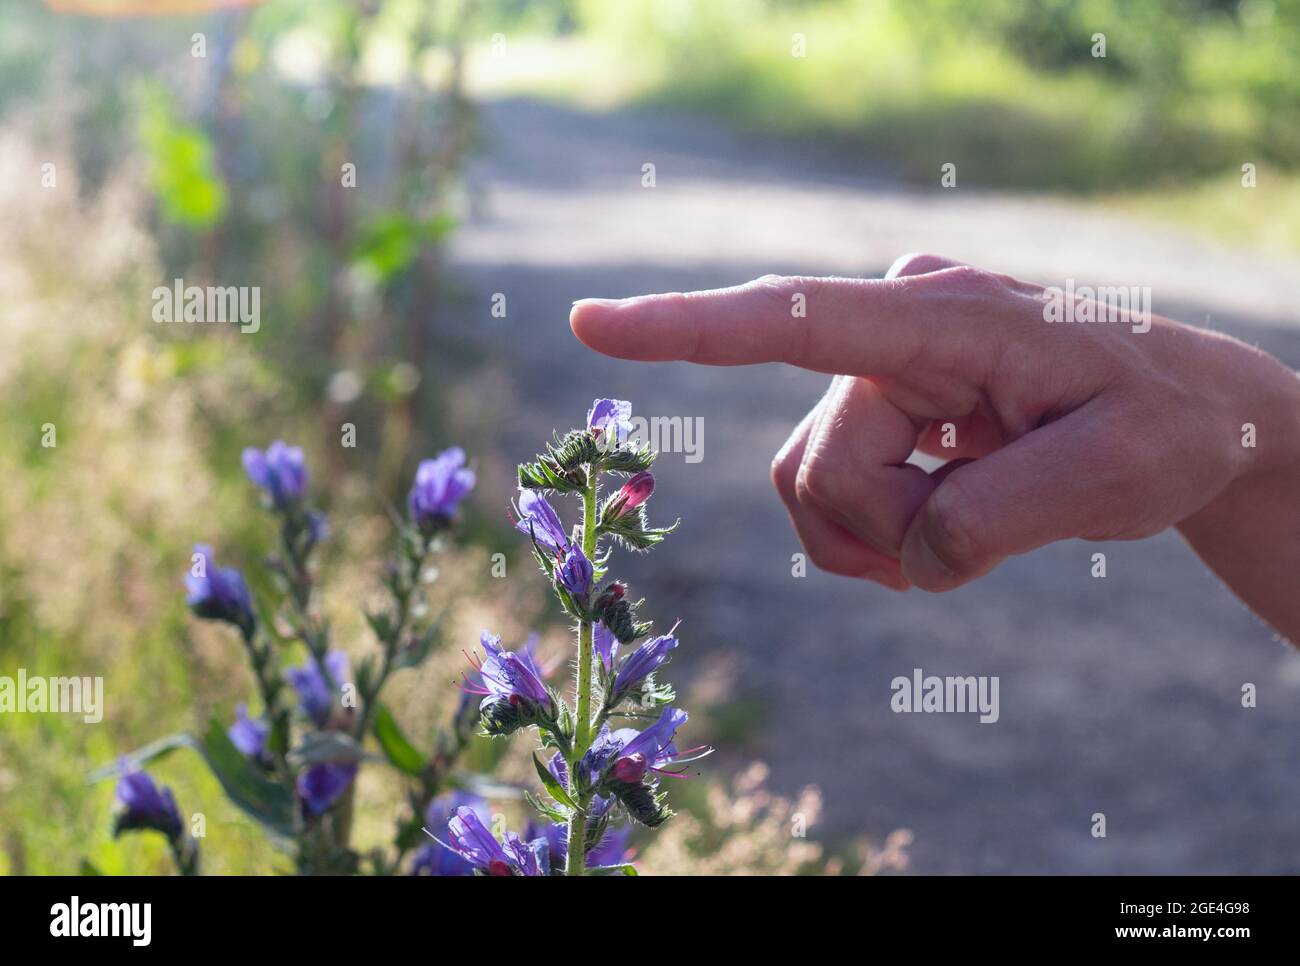 Woman's hand touches Blue melliferous flowers - Blueweed (Echium vulgare)  is a medicinal plant. Close up. Stock Photo